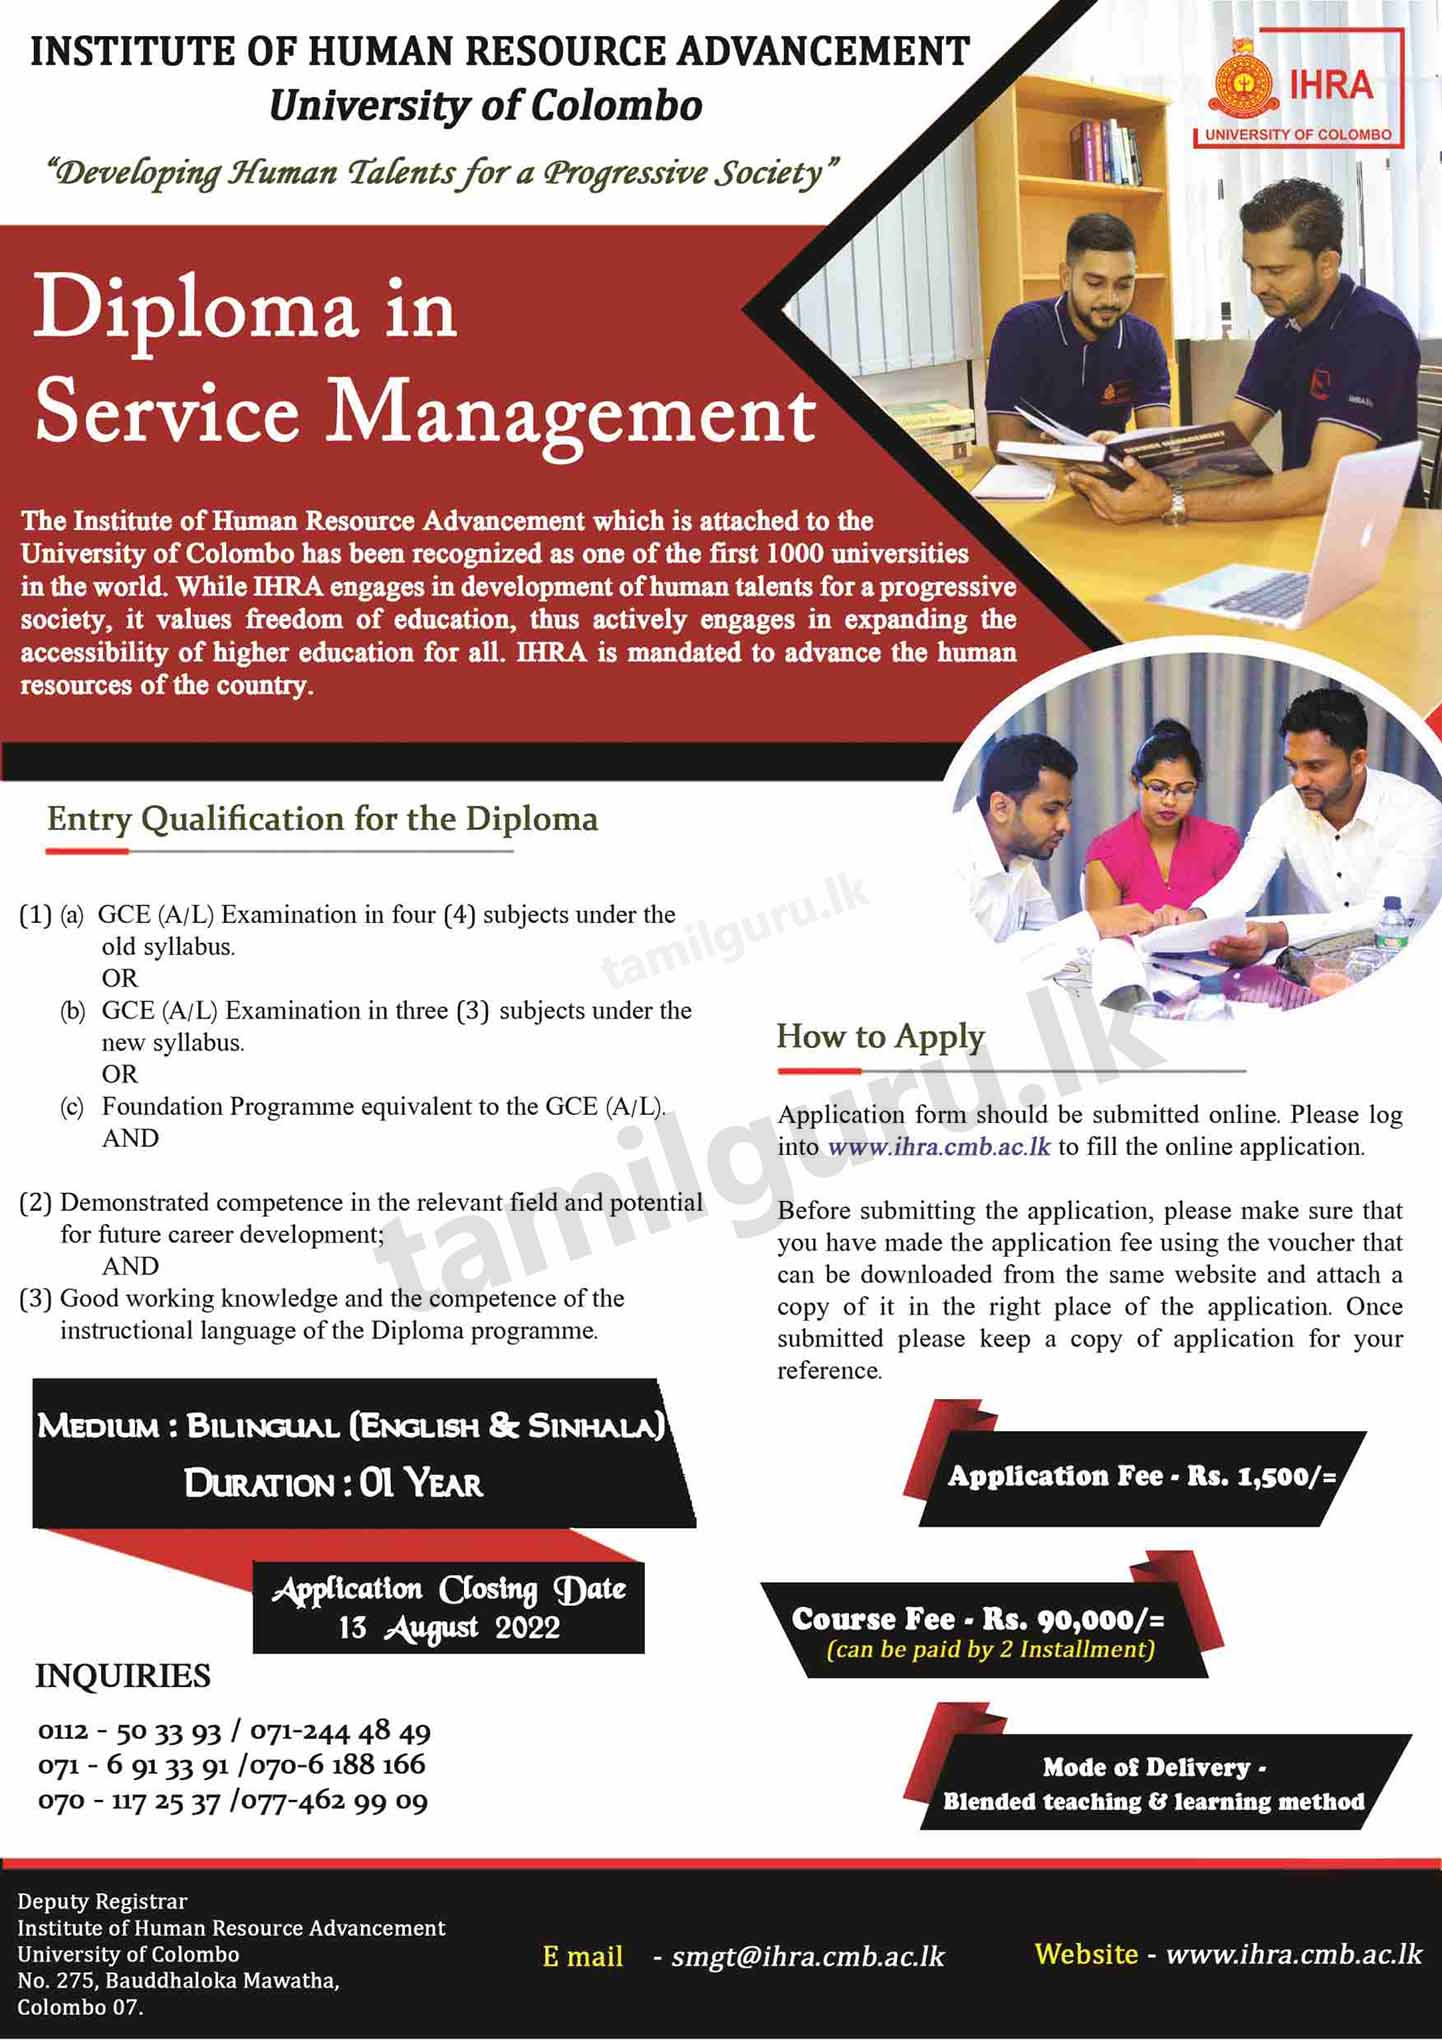 Diploma in Service Management (DSM) Course (2022 Intake) - University of Colombo (Details in English)